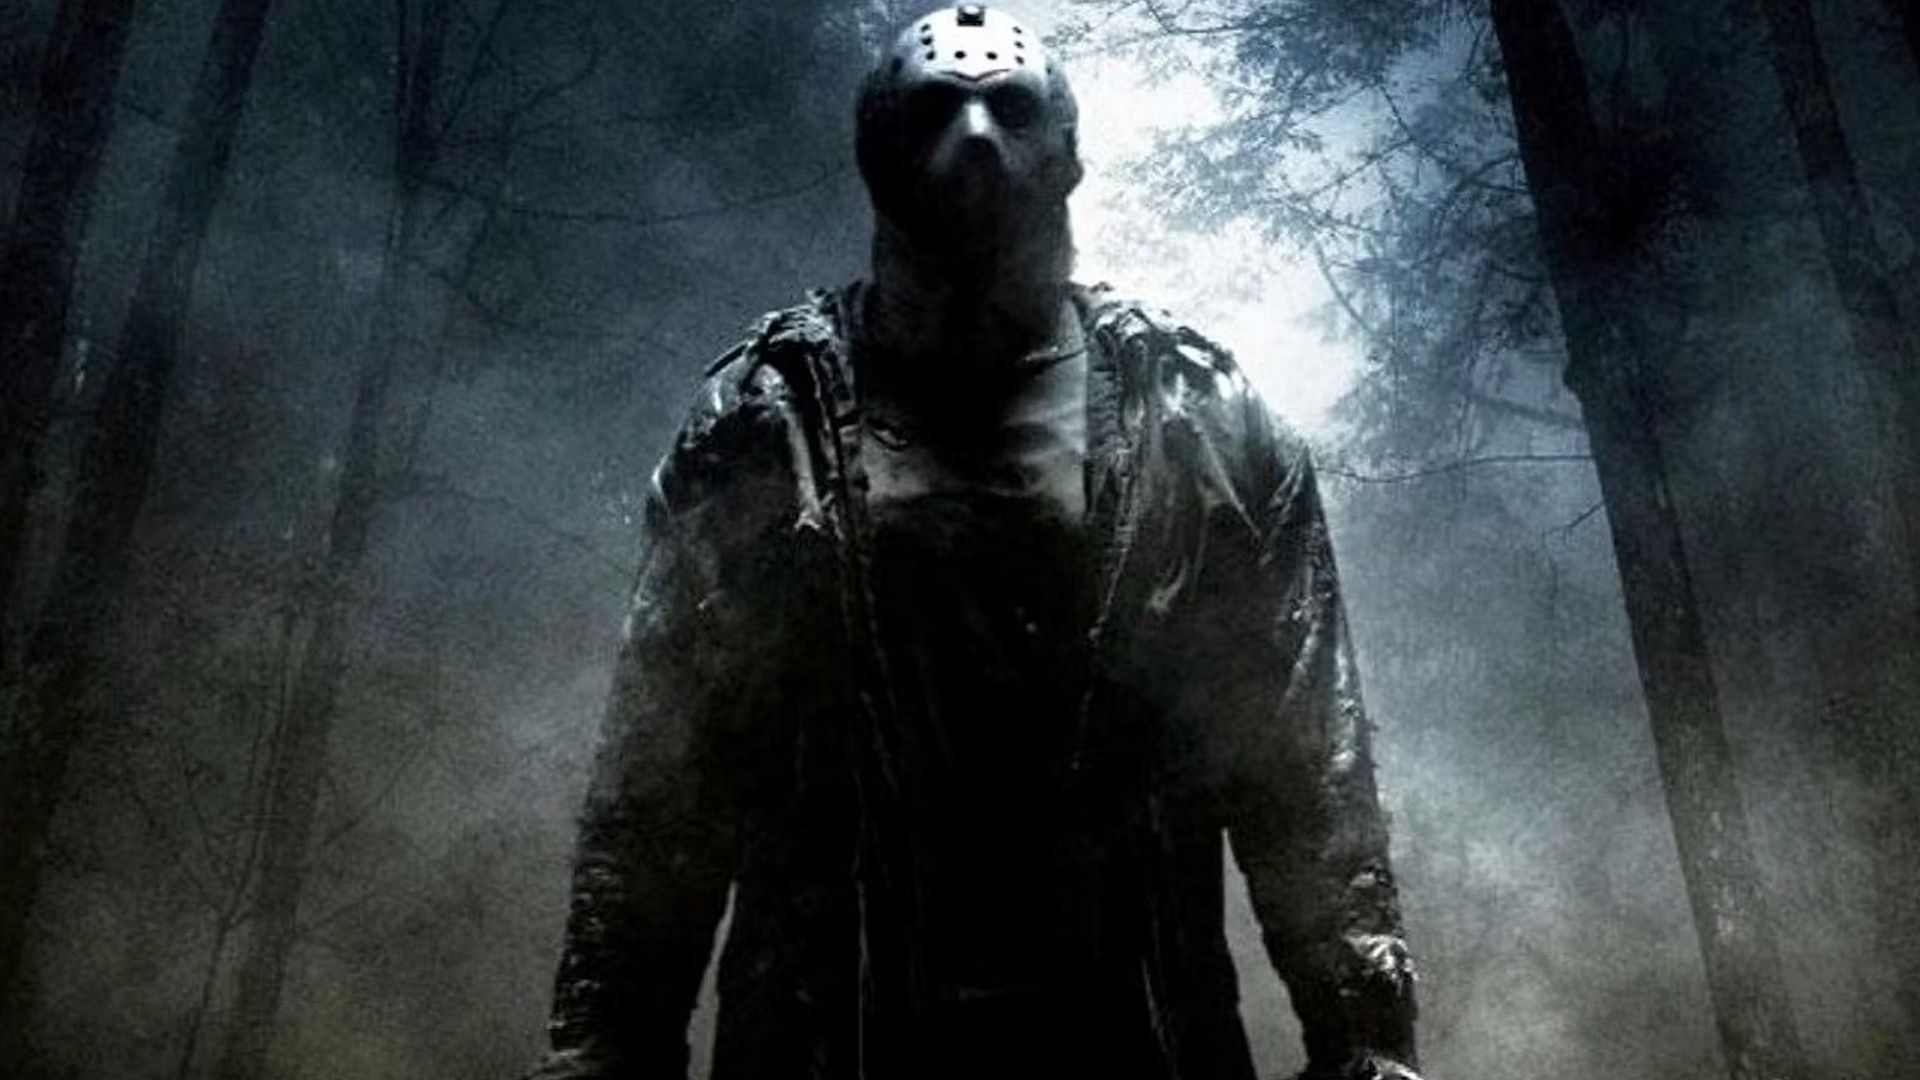 Jason Voorhees in Friday the 13th 2009 wearing a hockey mask and standing in a forest.